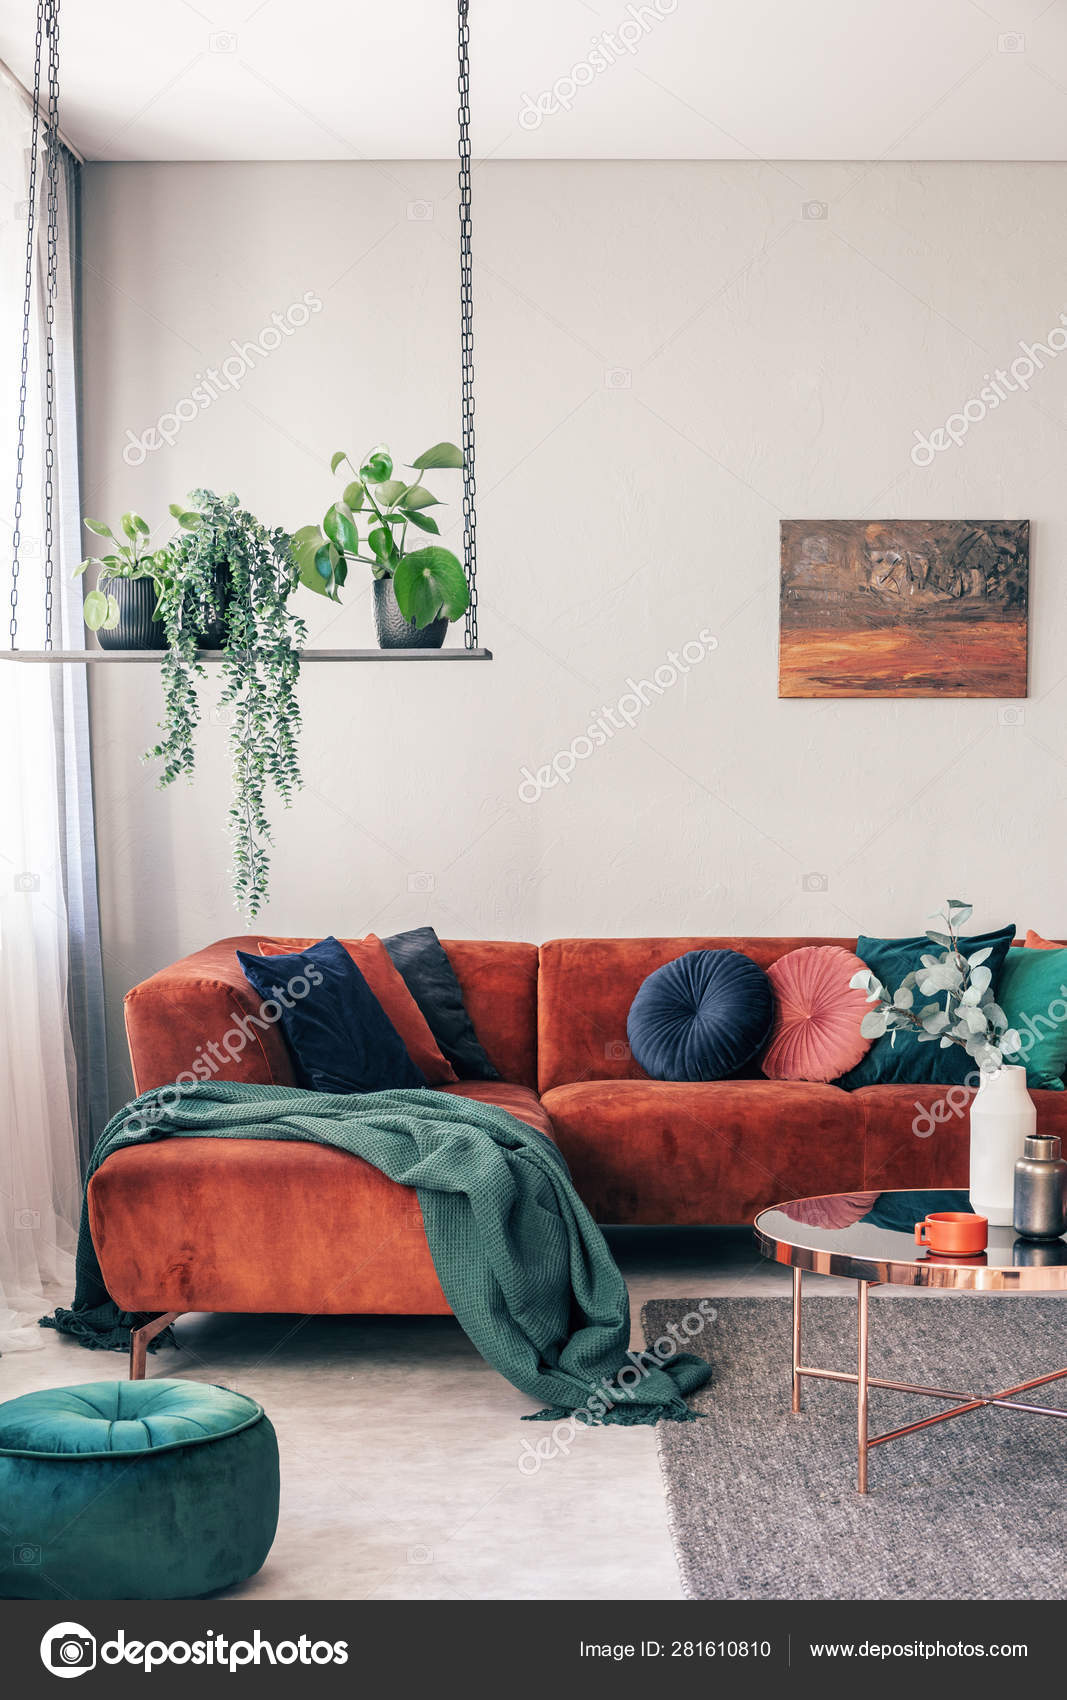 Green Flowers On Stylish Swing In, Flowers For Living Room